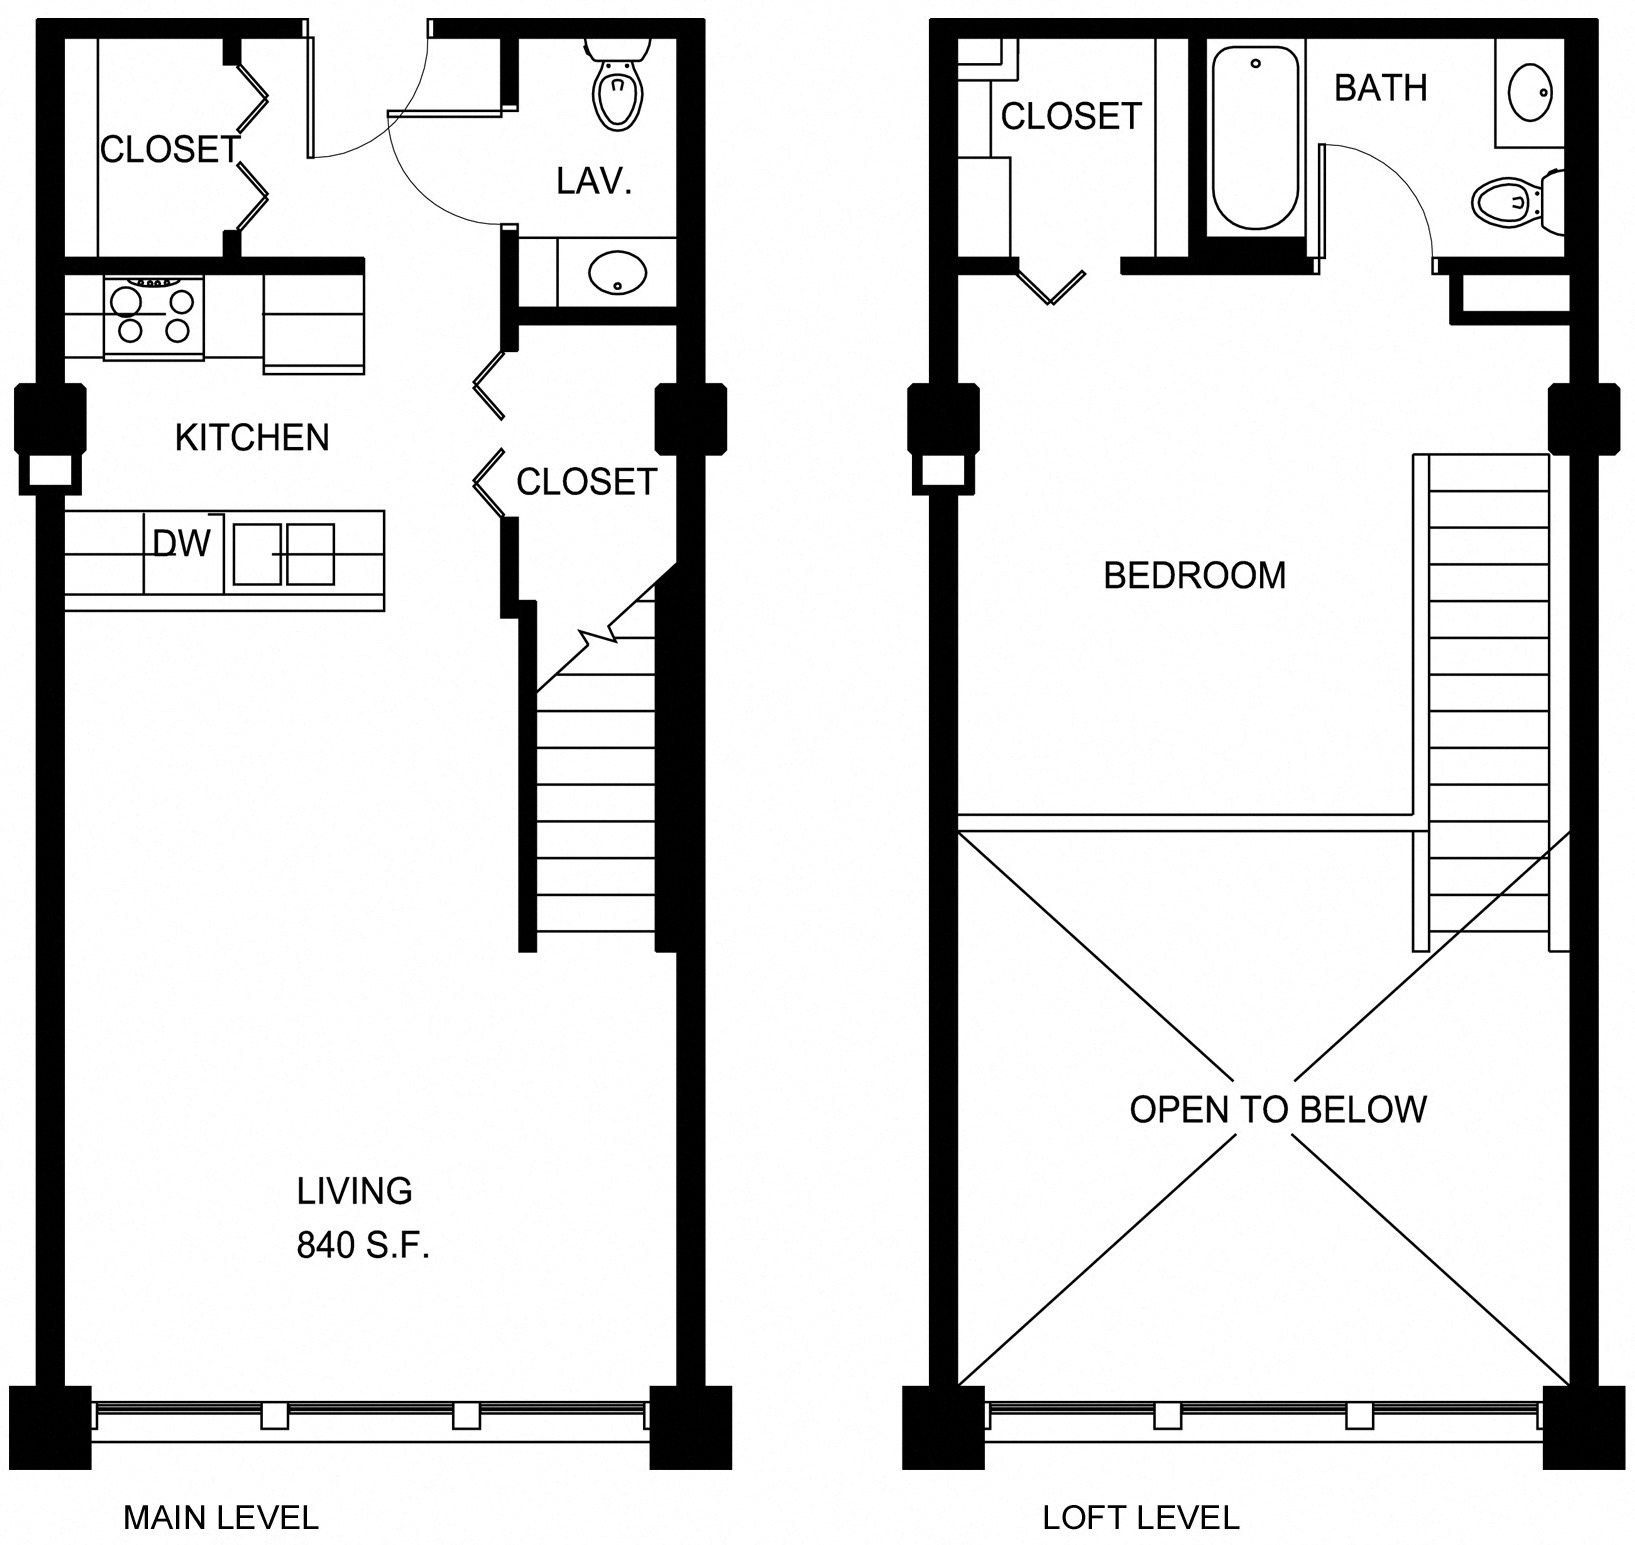 Floorplan for Apartment #P140, 1 bedroom unit at Halstead Providence